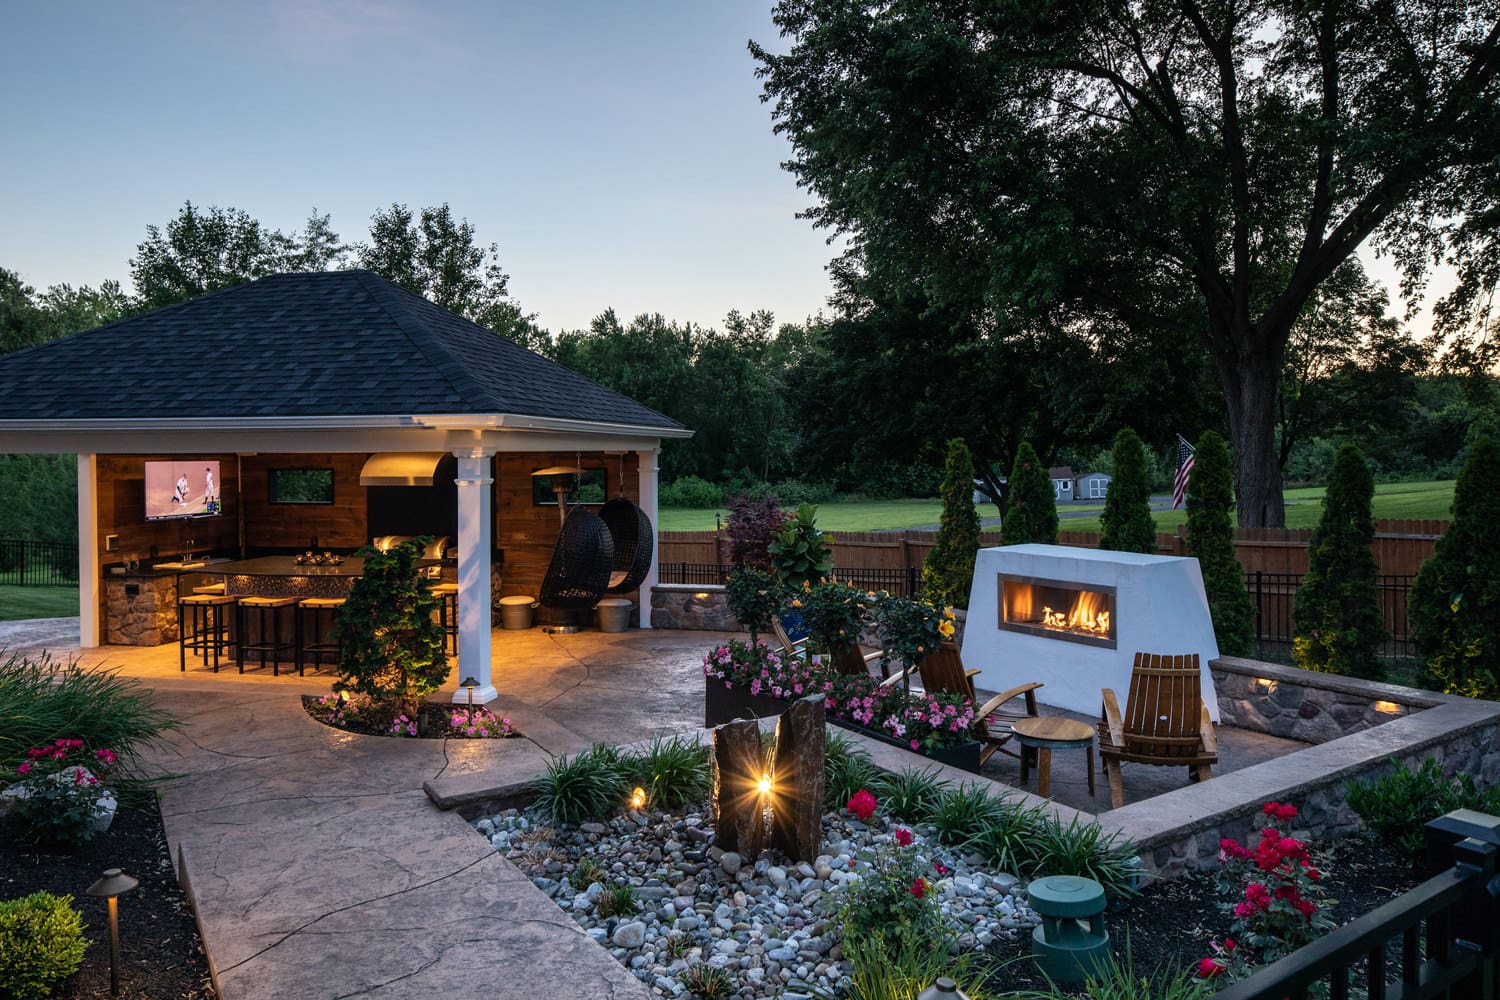 This photo captures the perfect balance between structure and landscape supporting and complementing each other to create a lovely and harmonious outdoor living space.